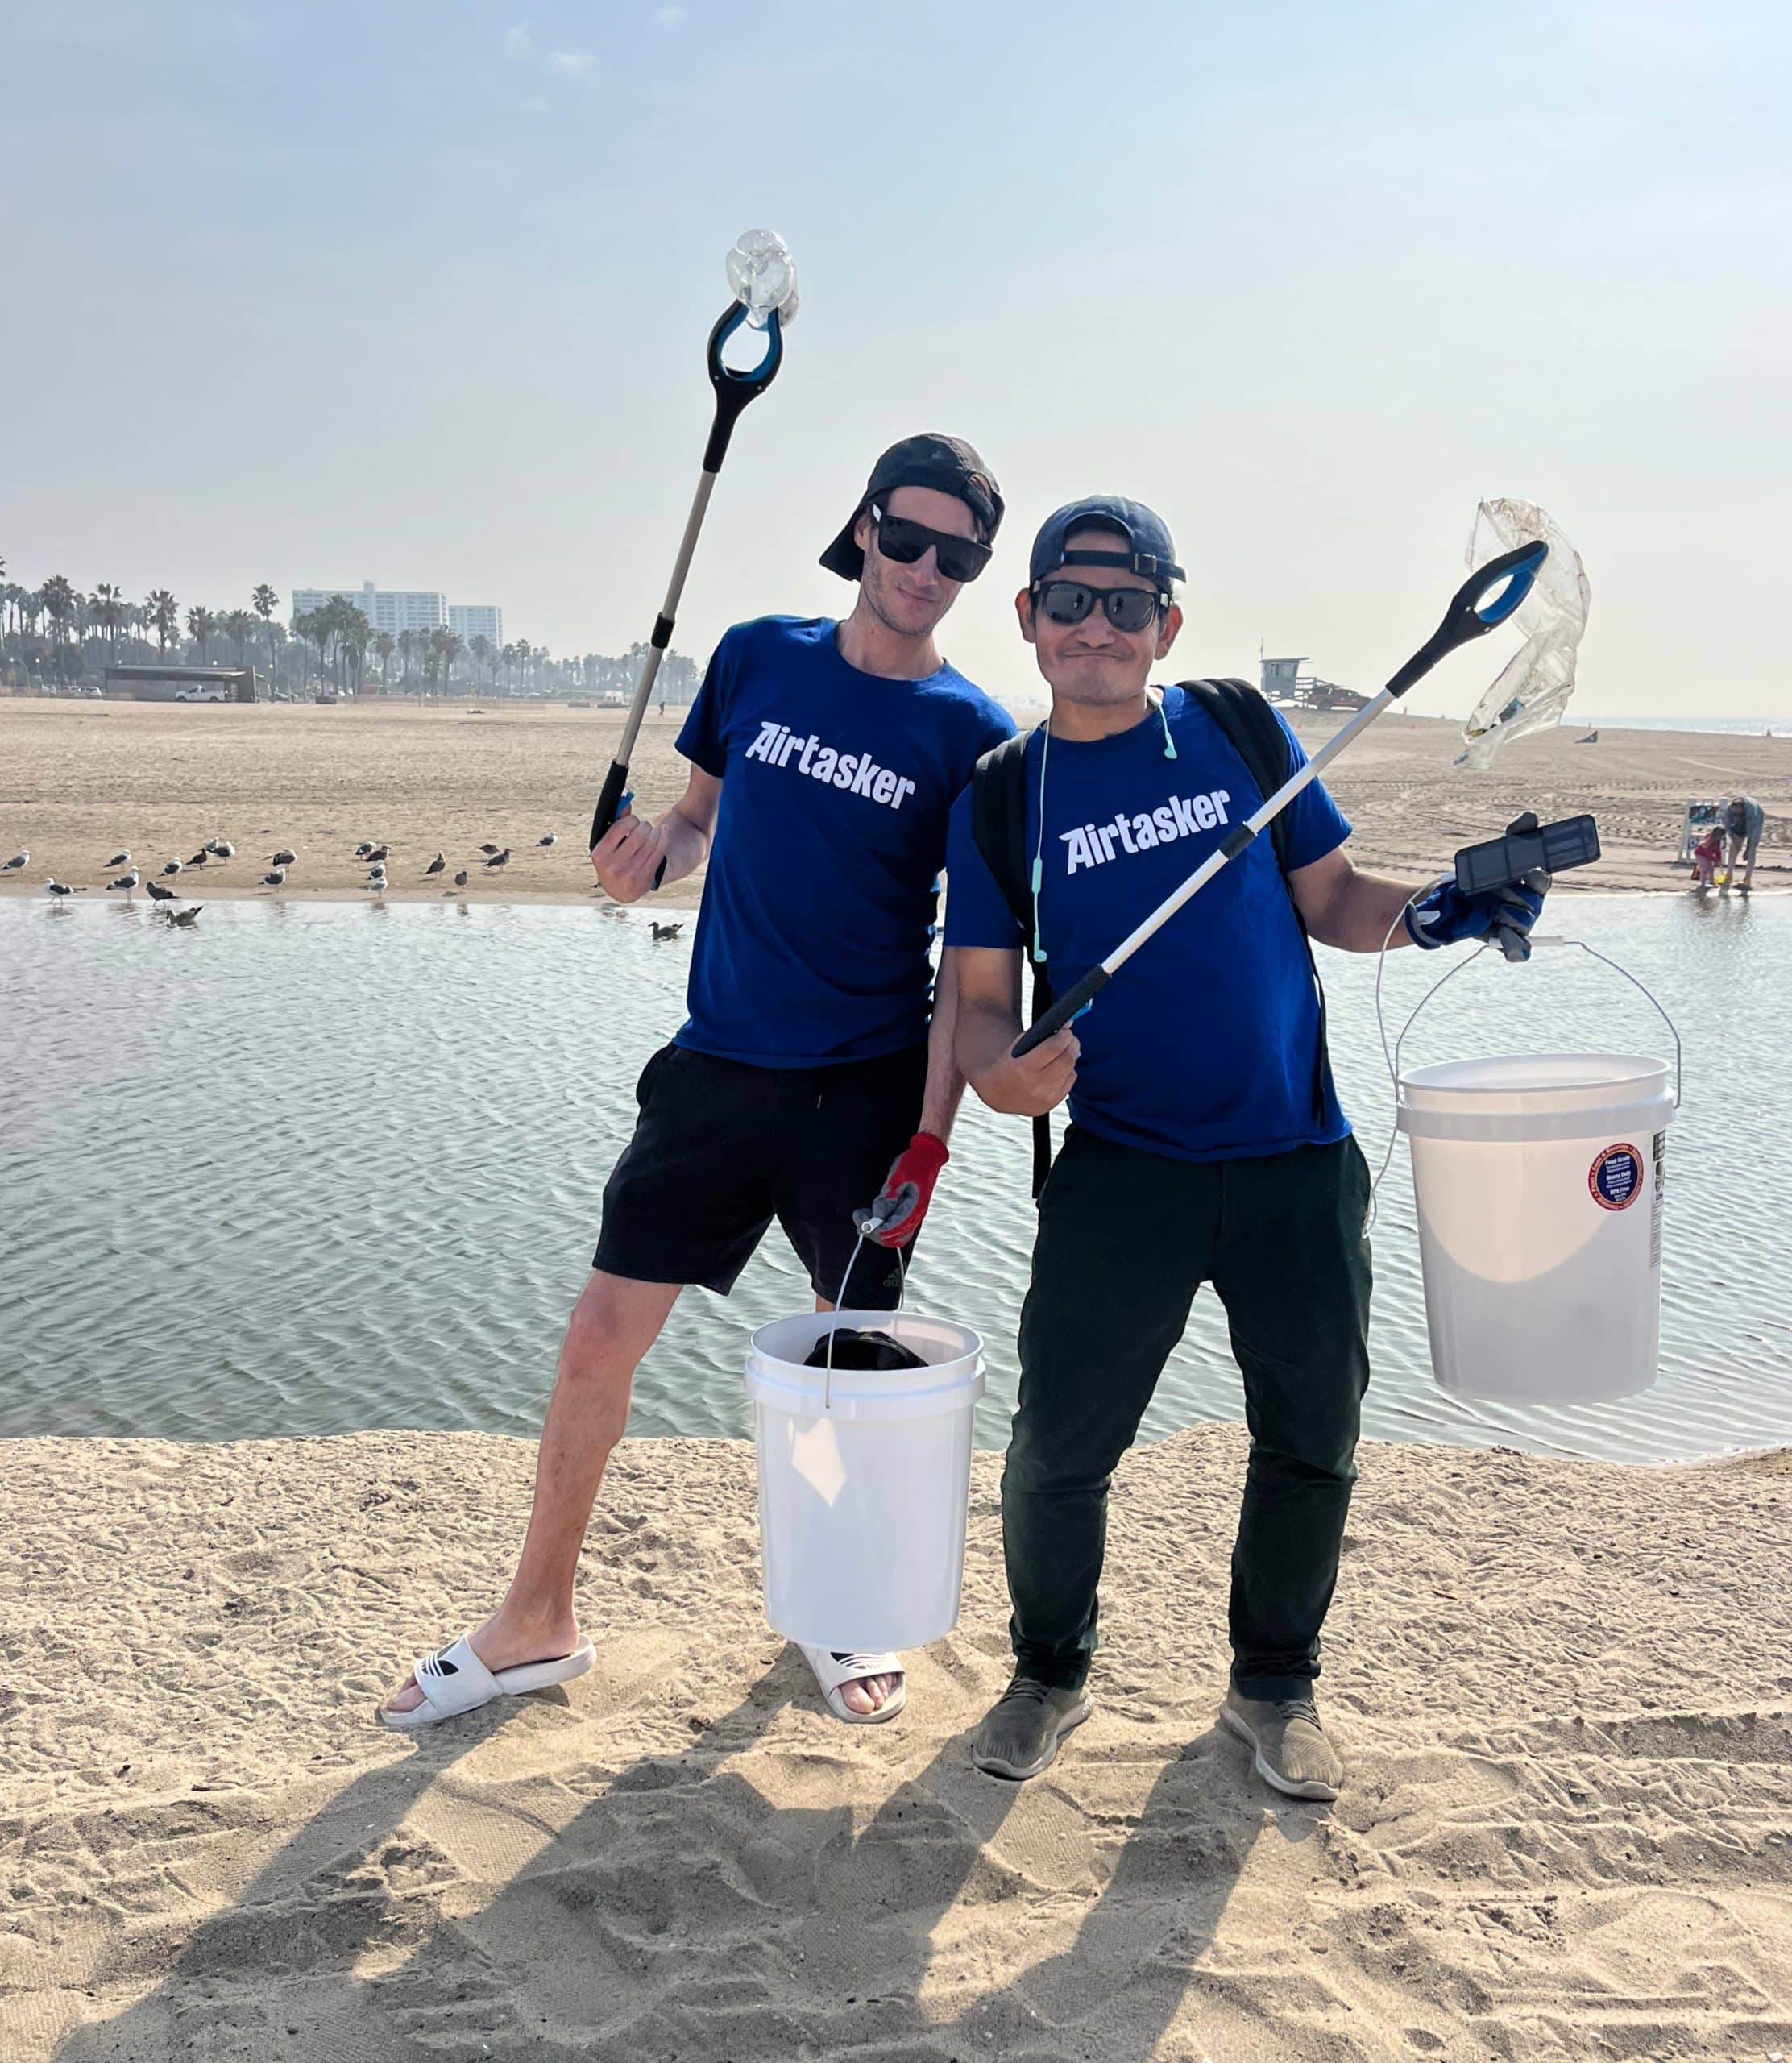 Taskers picking up trash along the beach in Los Angeles.